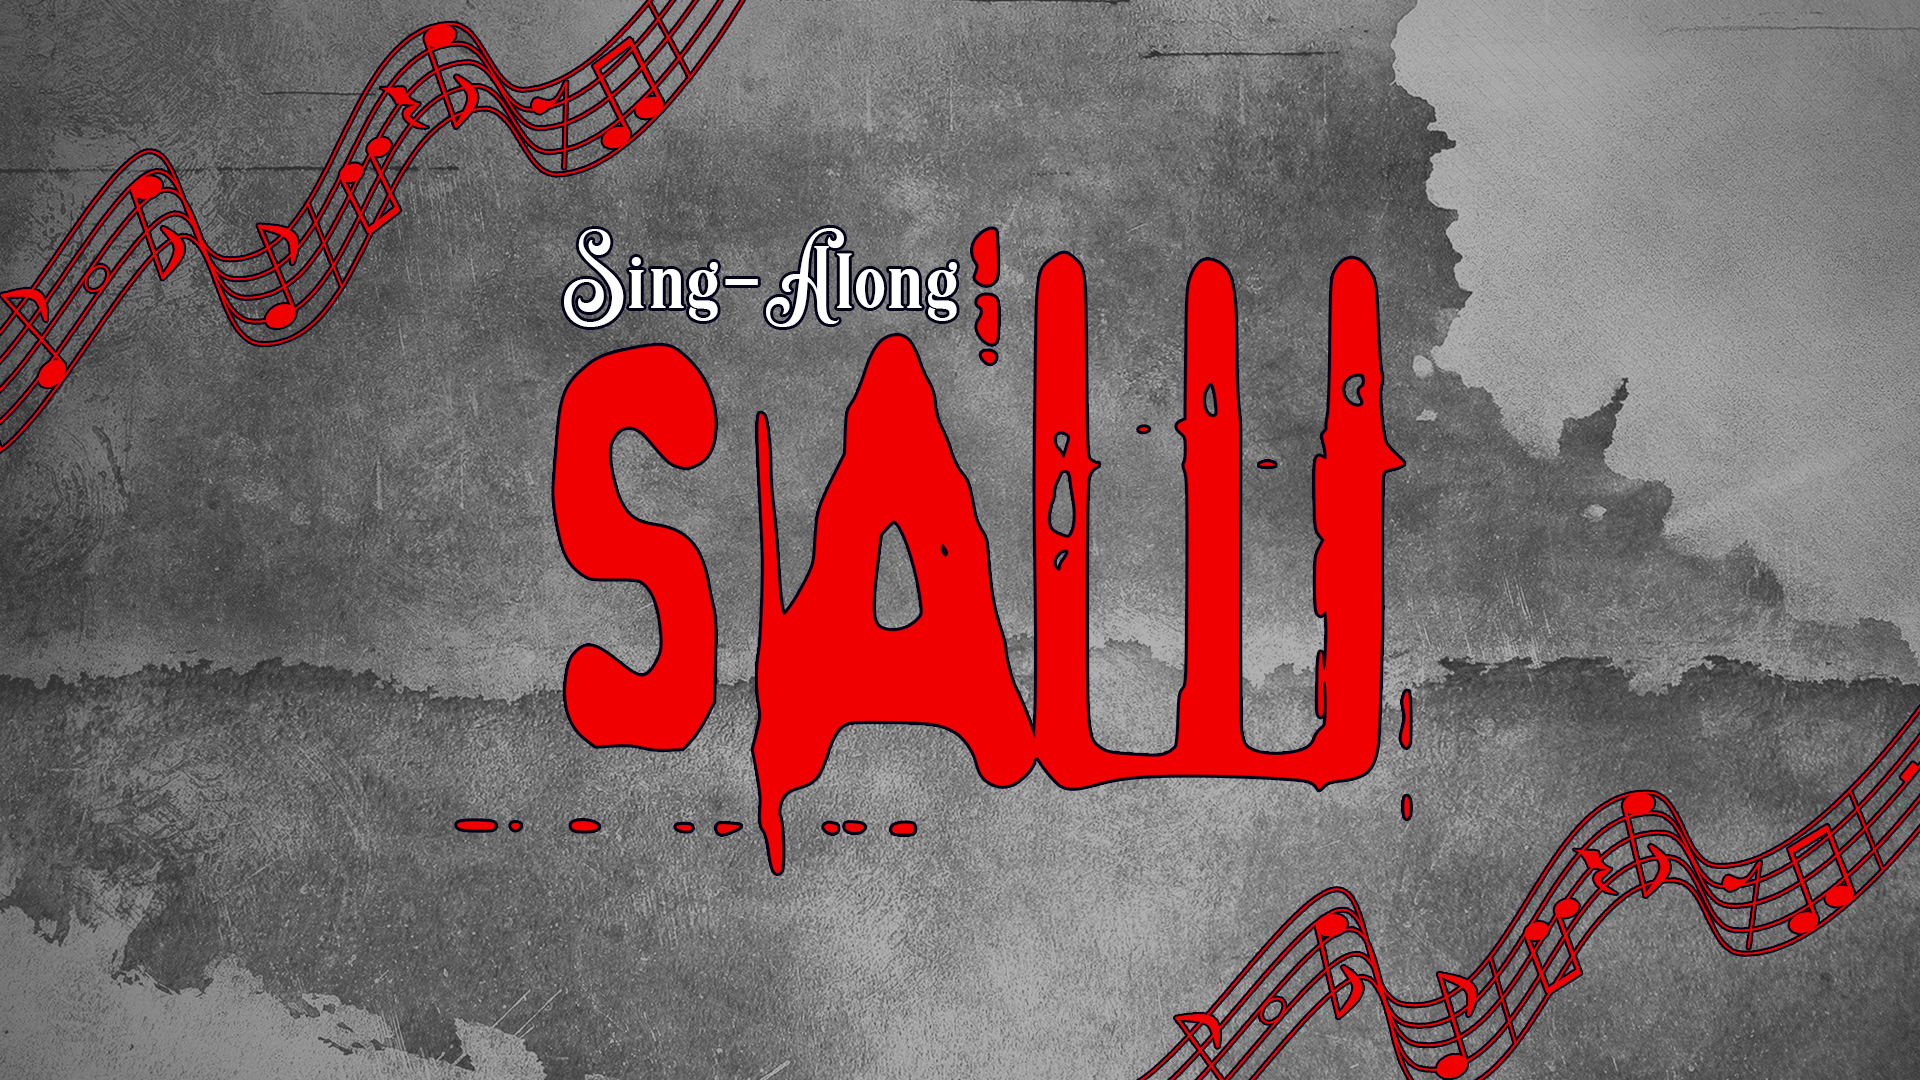 Grey background, with musical notation and red text "Sing-along SAW"